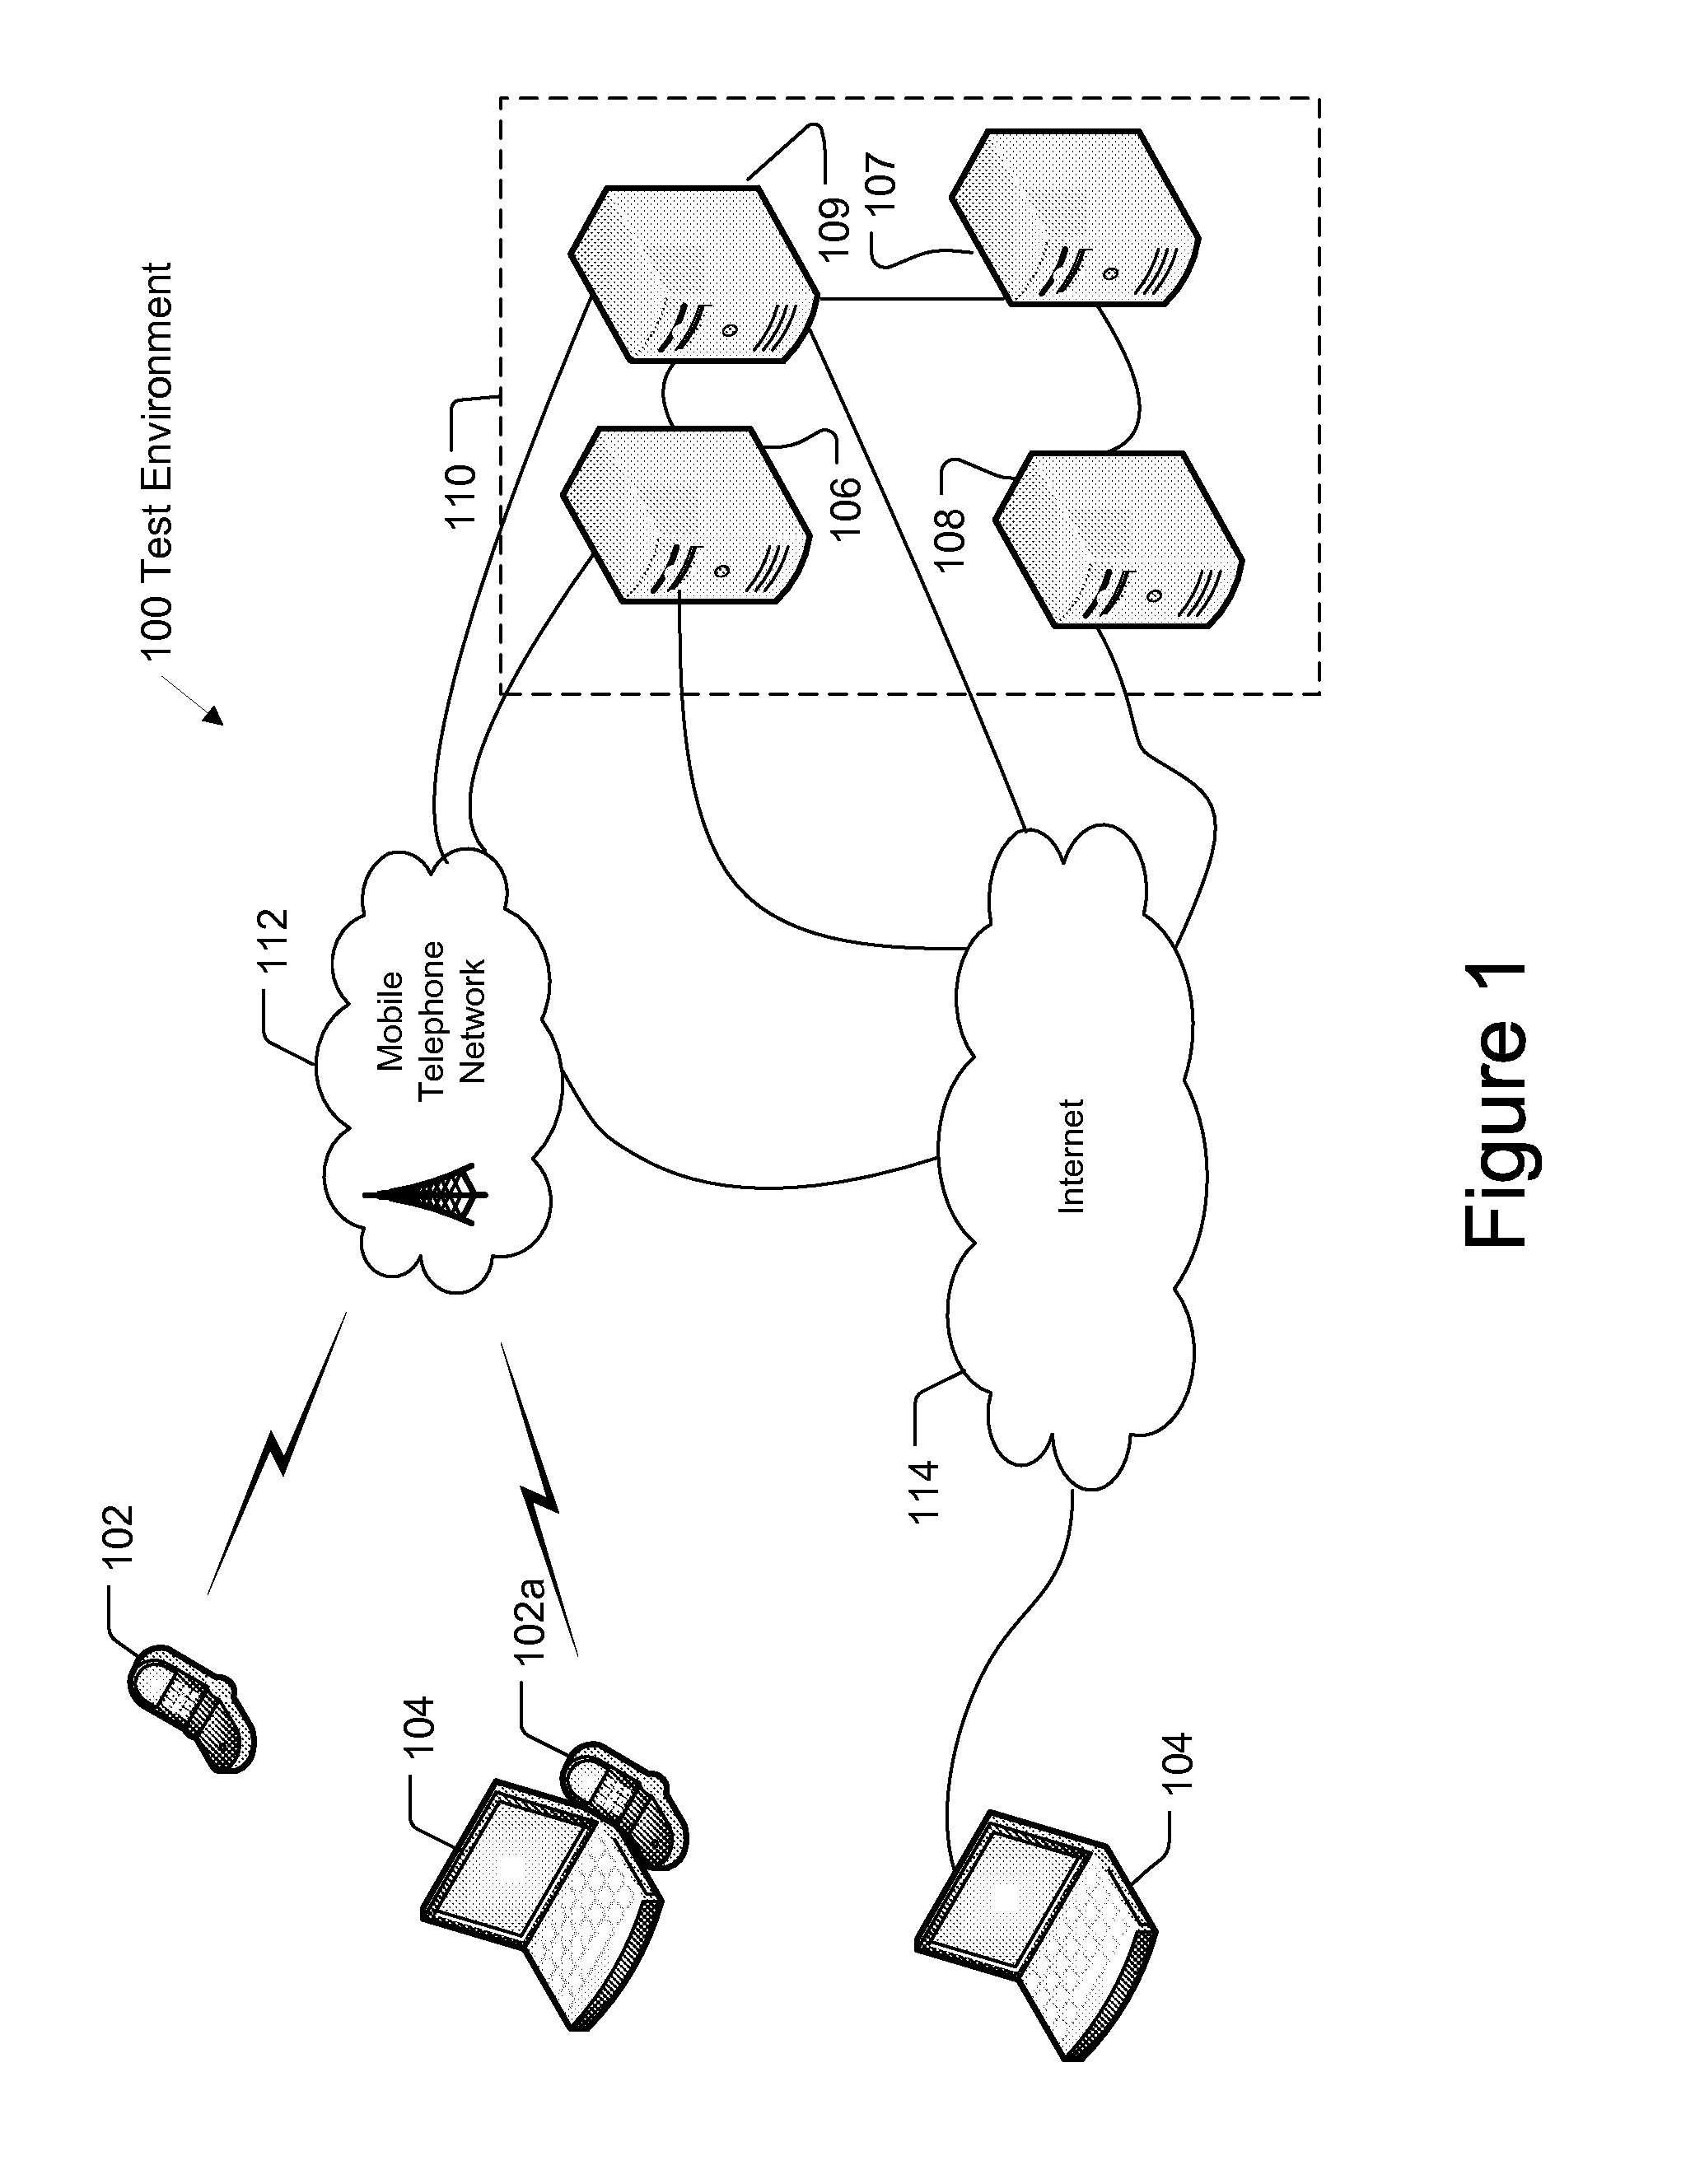 System and Method for Testing Mobile Telephone Devices using a Plurality of Communication Protocols